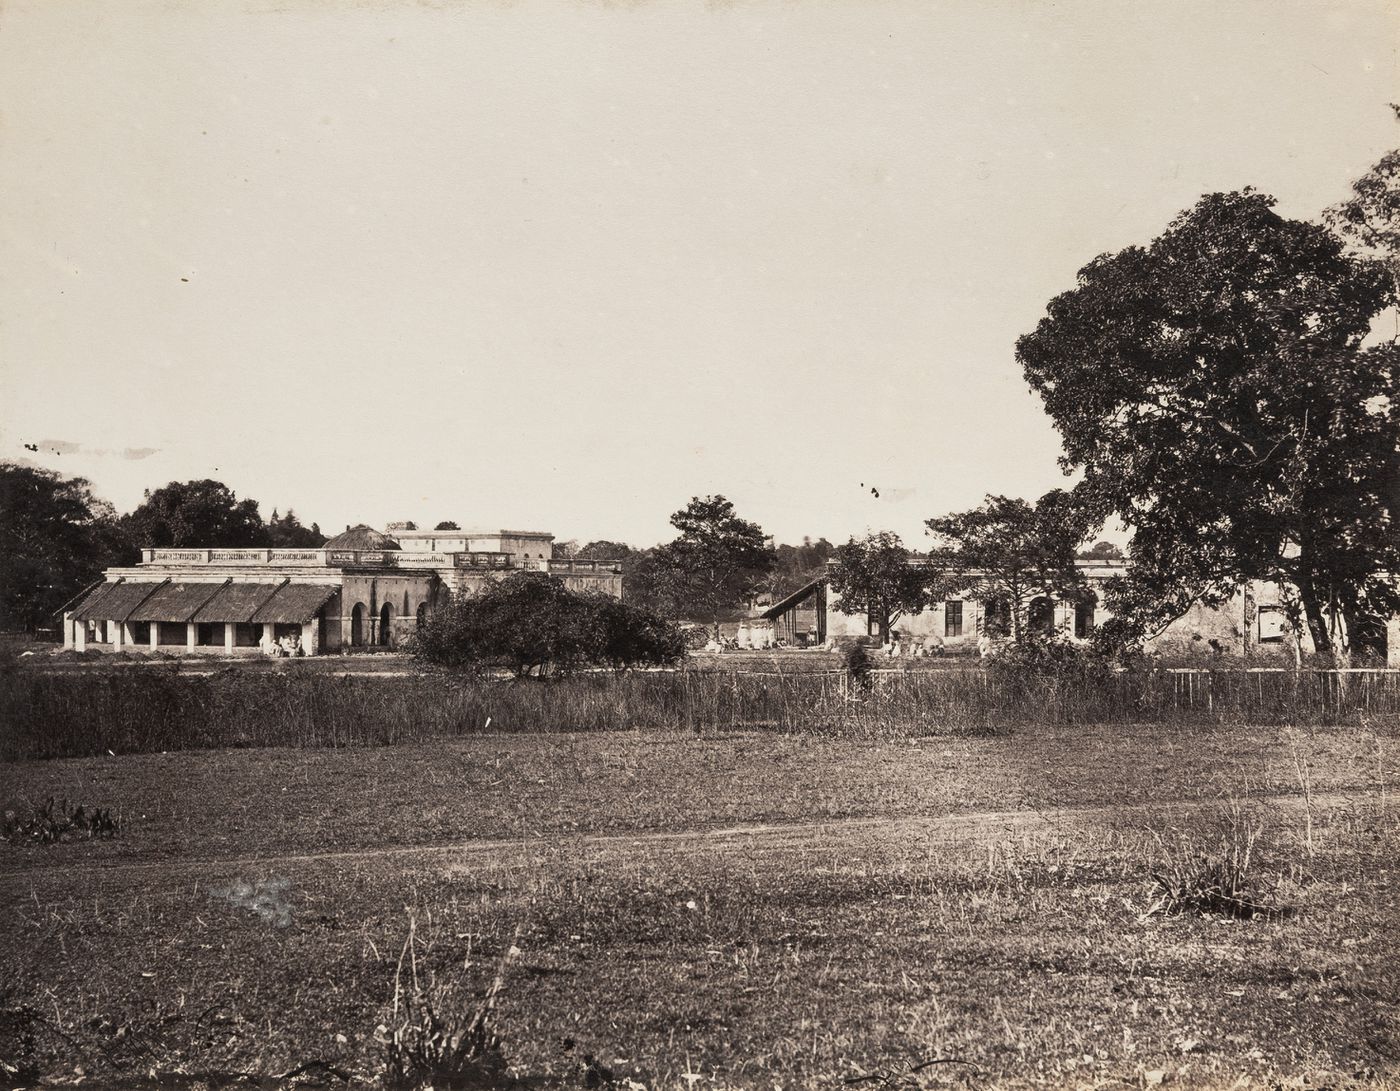 View of the Ameer's Court, Sylhet, India (now Bangladesh)